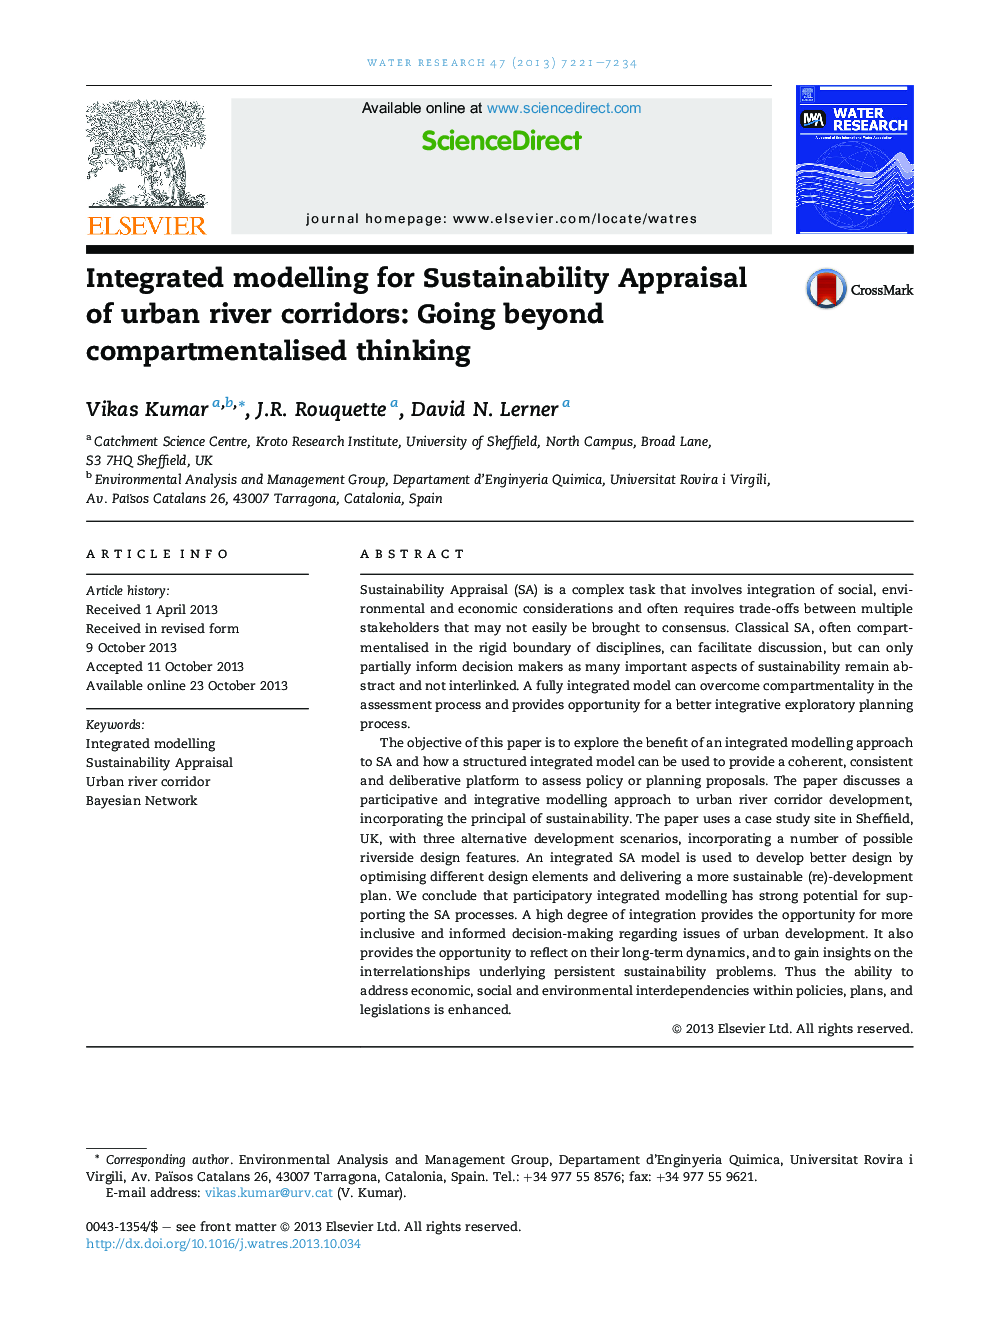 Integrated modelling for Sustainability Appraisal ofÂ urban river corridors: Going beyond compartmentalised thinking